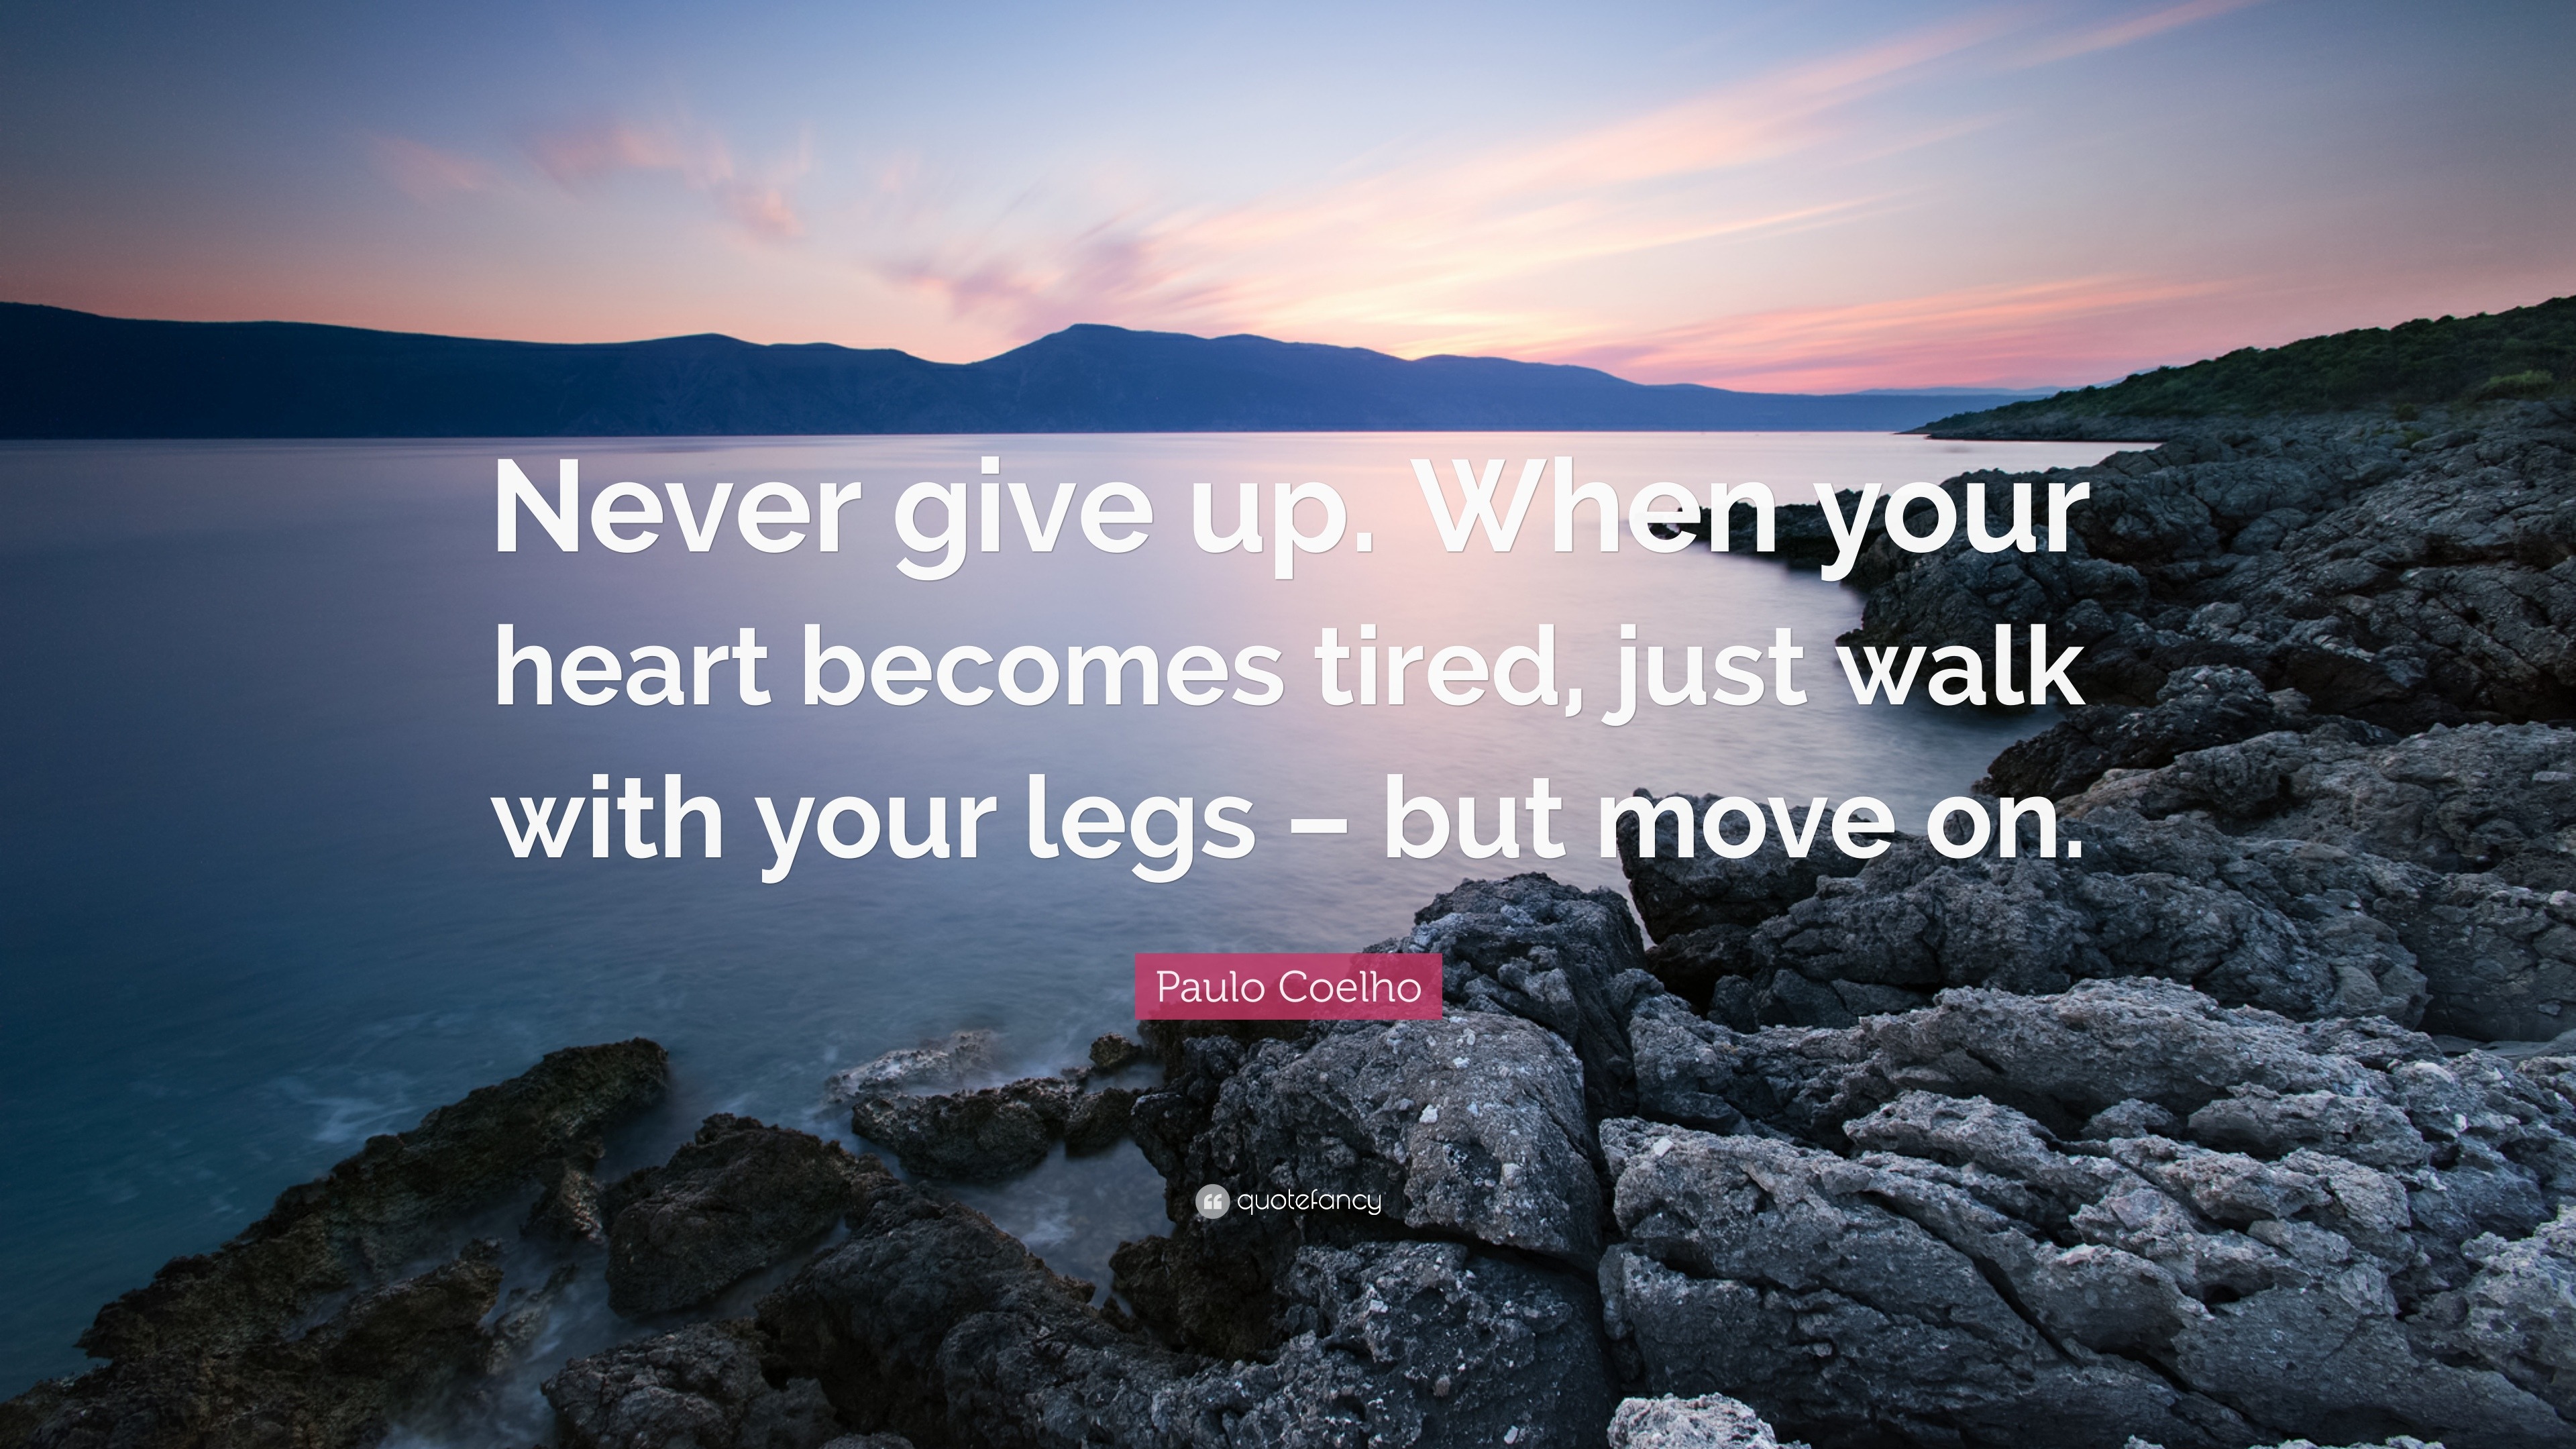 Paulo Coelho Quote: “Never give up. When your heart becomes tired